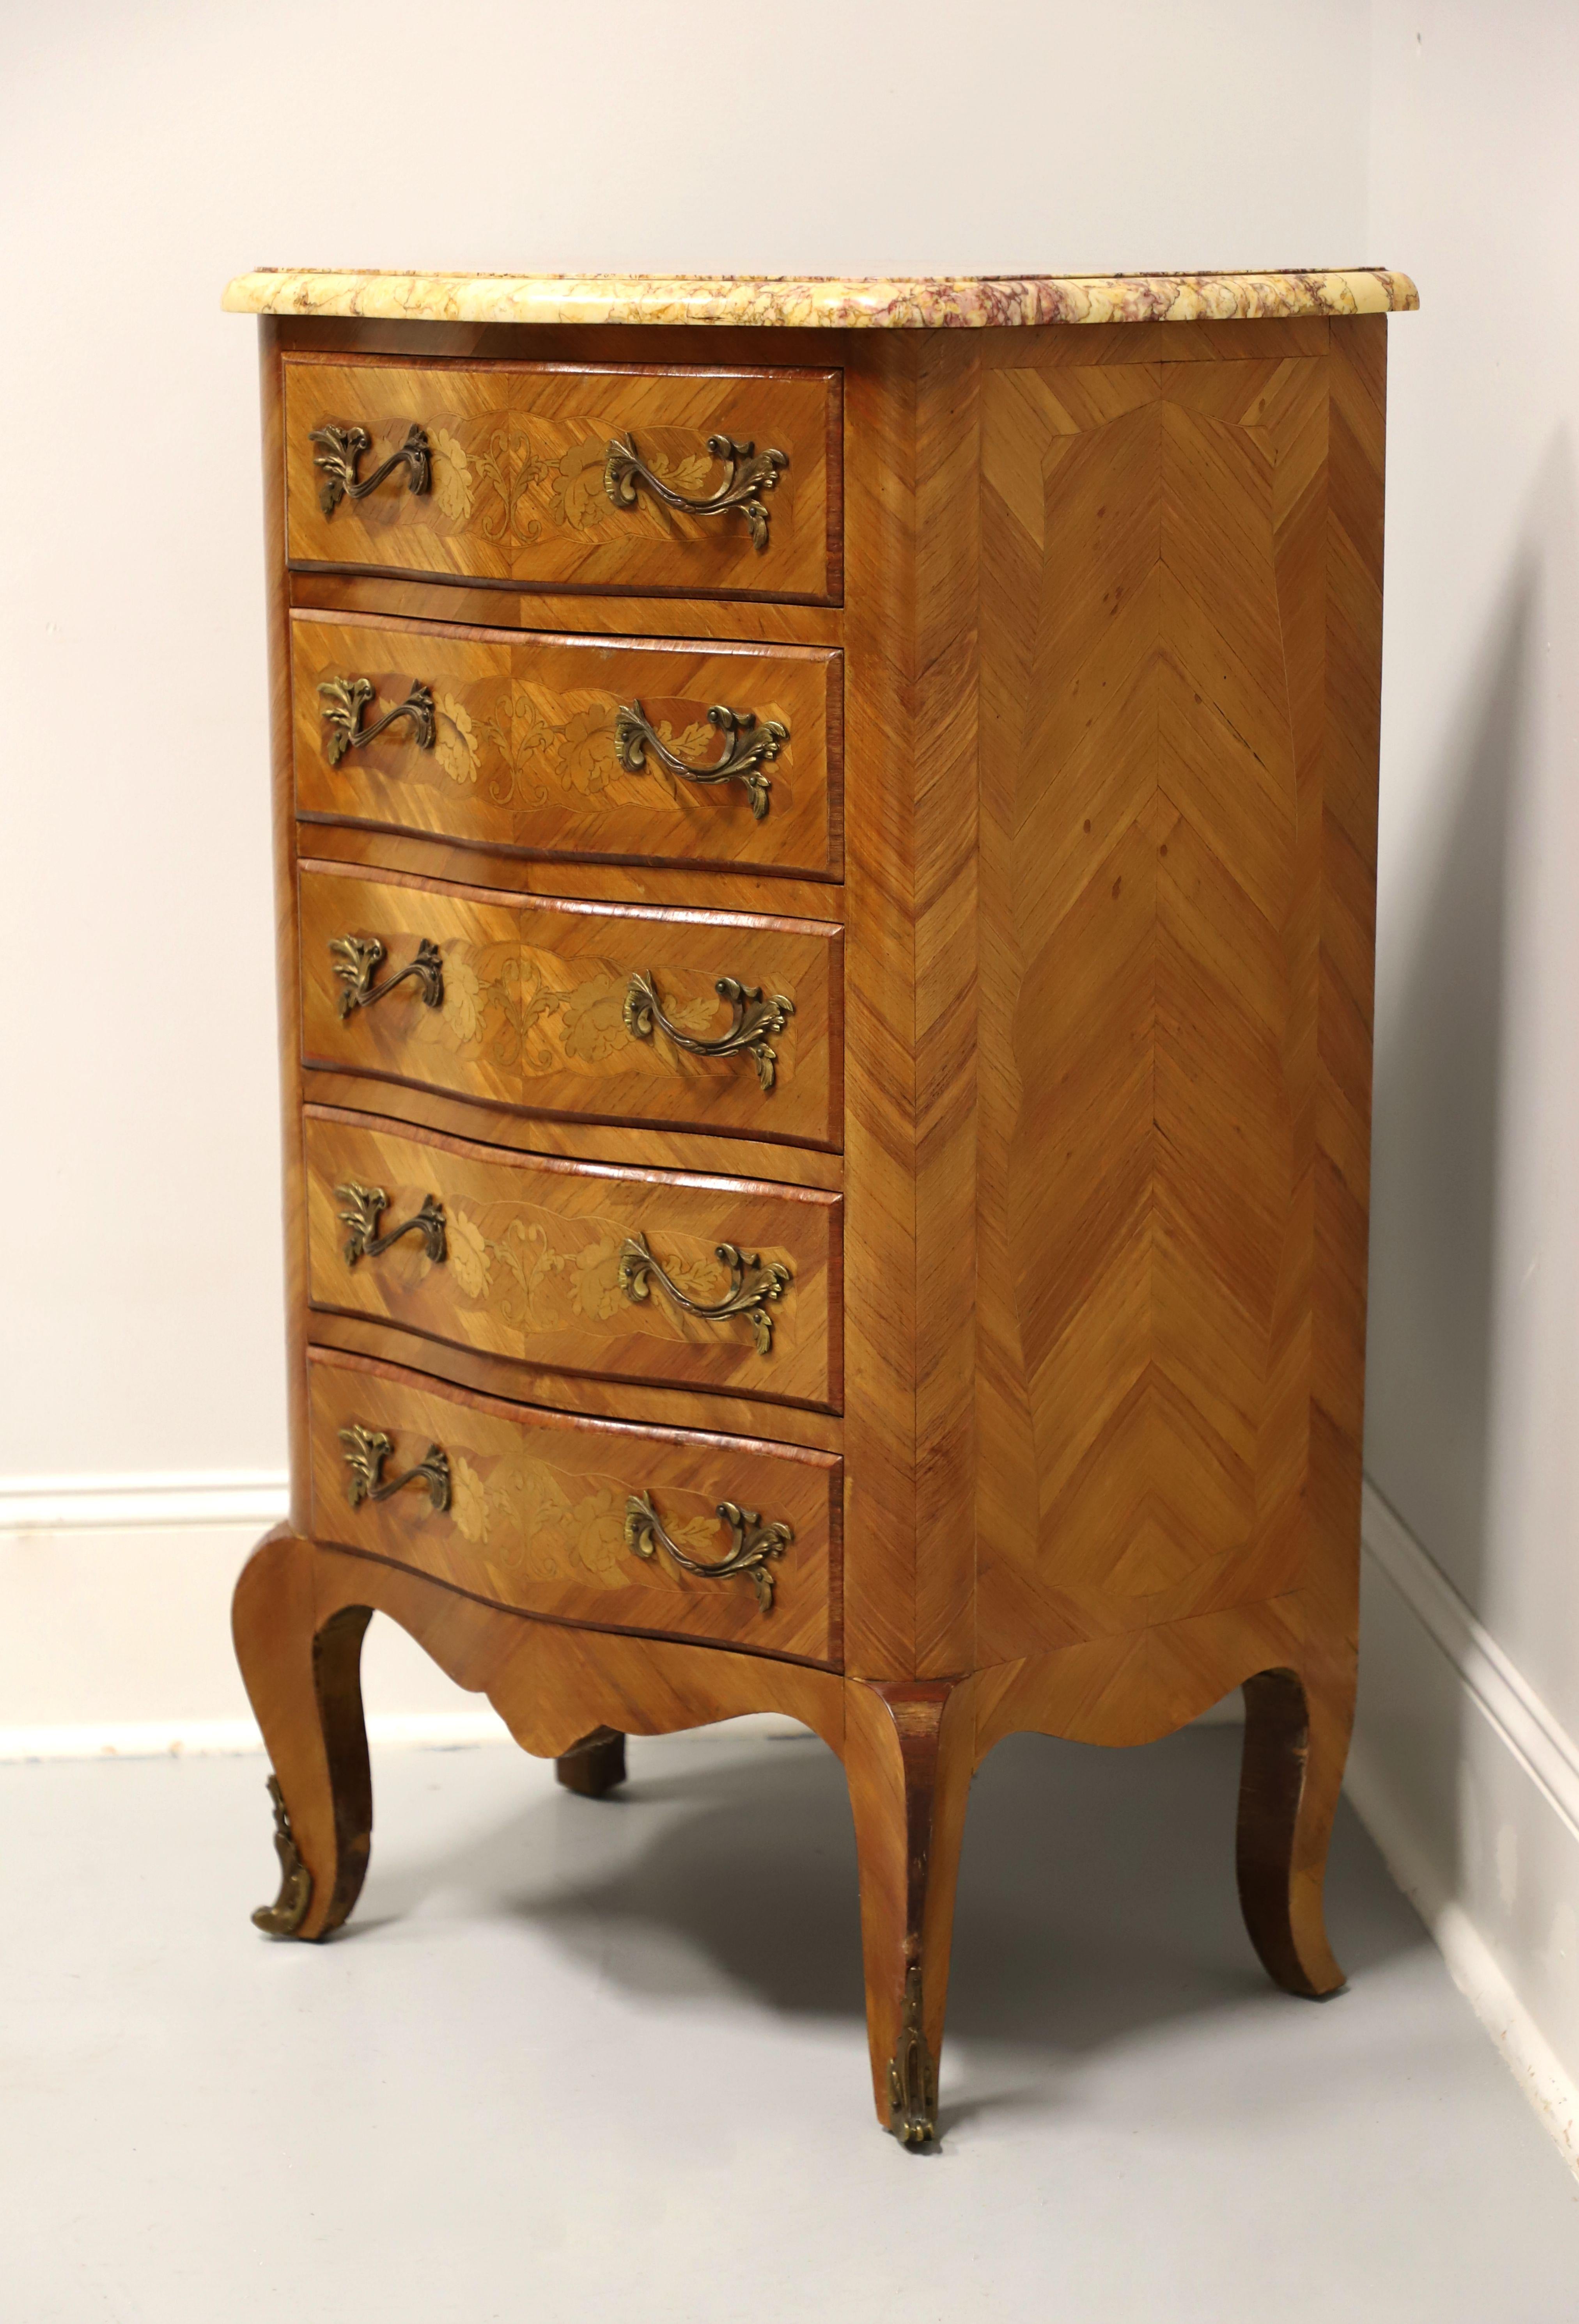 Antique French Louis XV Style Inlaid Kingwood Marble Top Lingerie Chest - B In Good Condition For Sale In Charlotte, NC